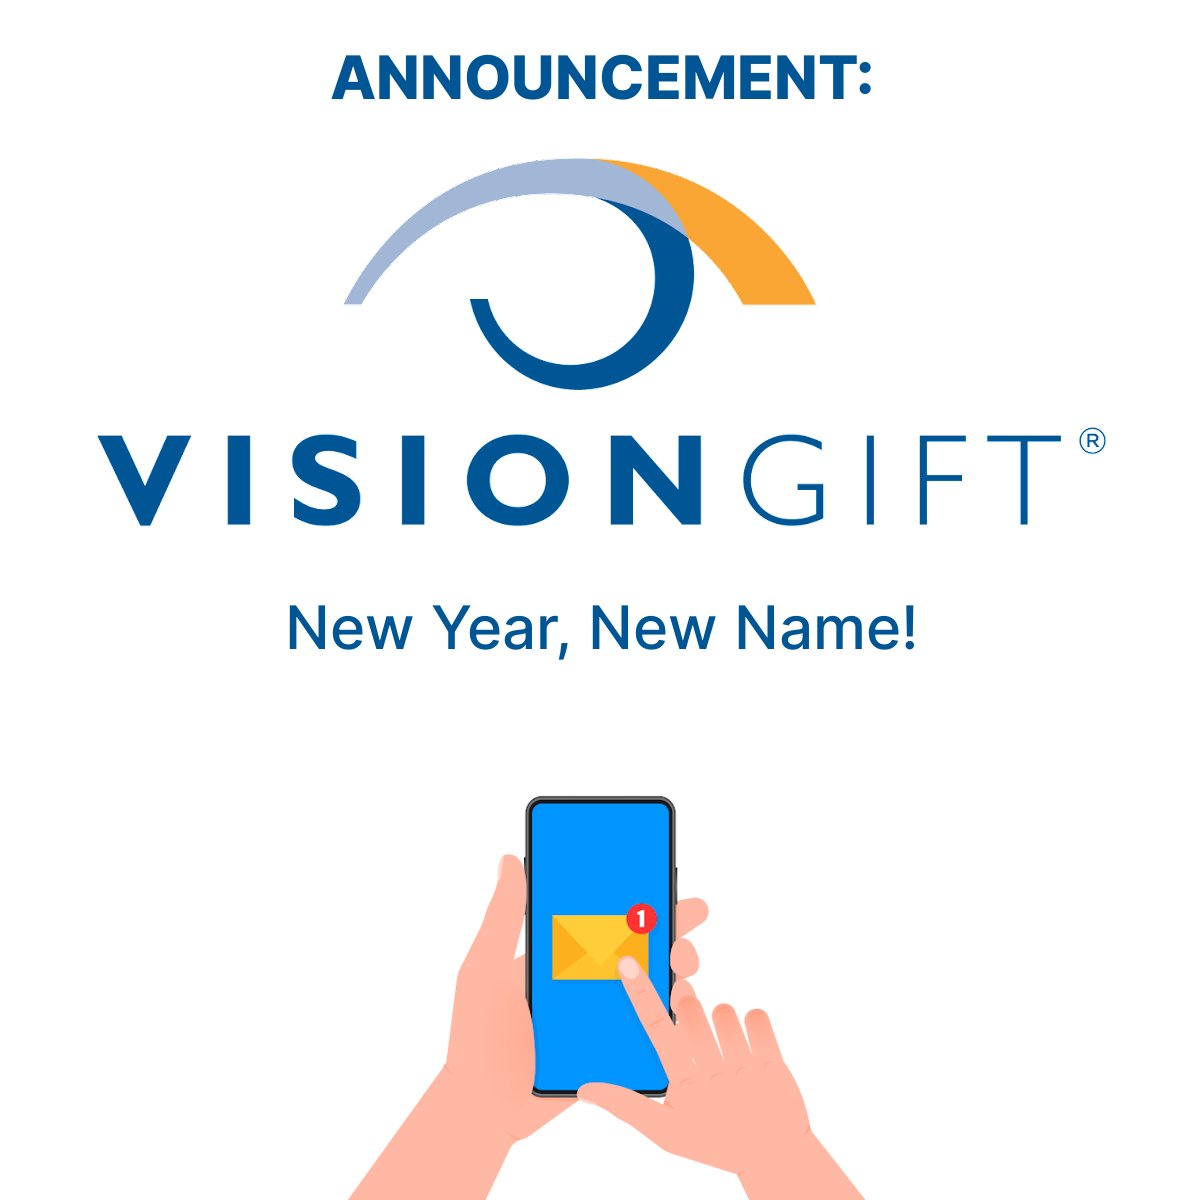 donatelifenw: Same spectacular organization, new name! As of March 1, our friends at Lions VisionGift began operating under the new name, 'VisionGift.' Learn more by visiting them at @TheVisionGift! #DonateLife #SeeTheGift #RestoreSight #TissueTuesday